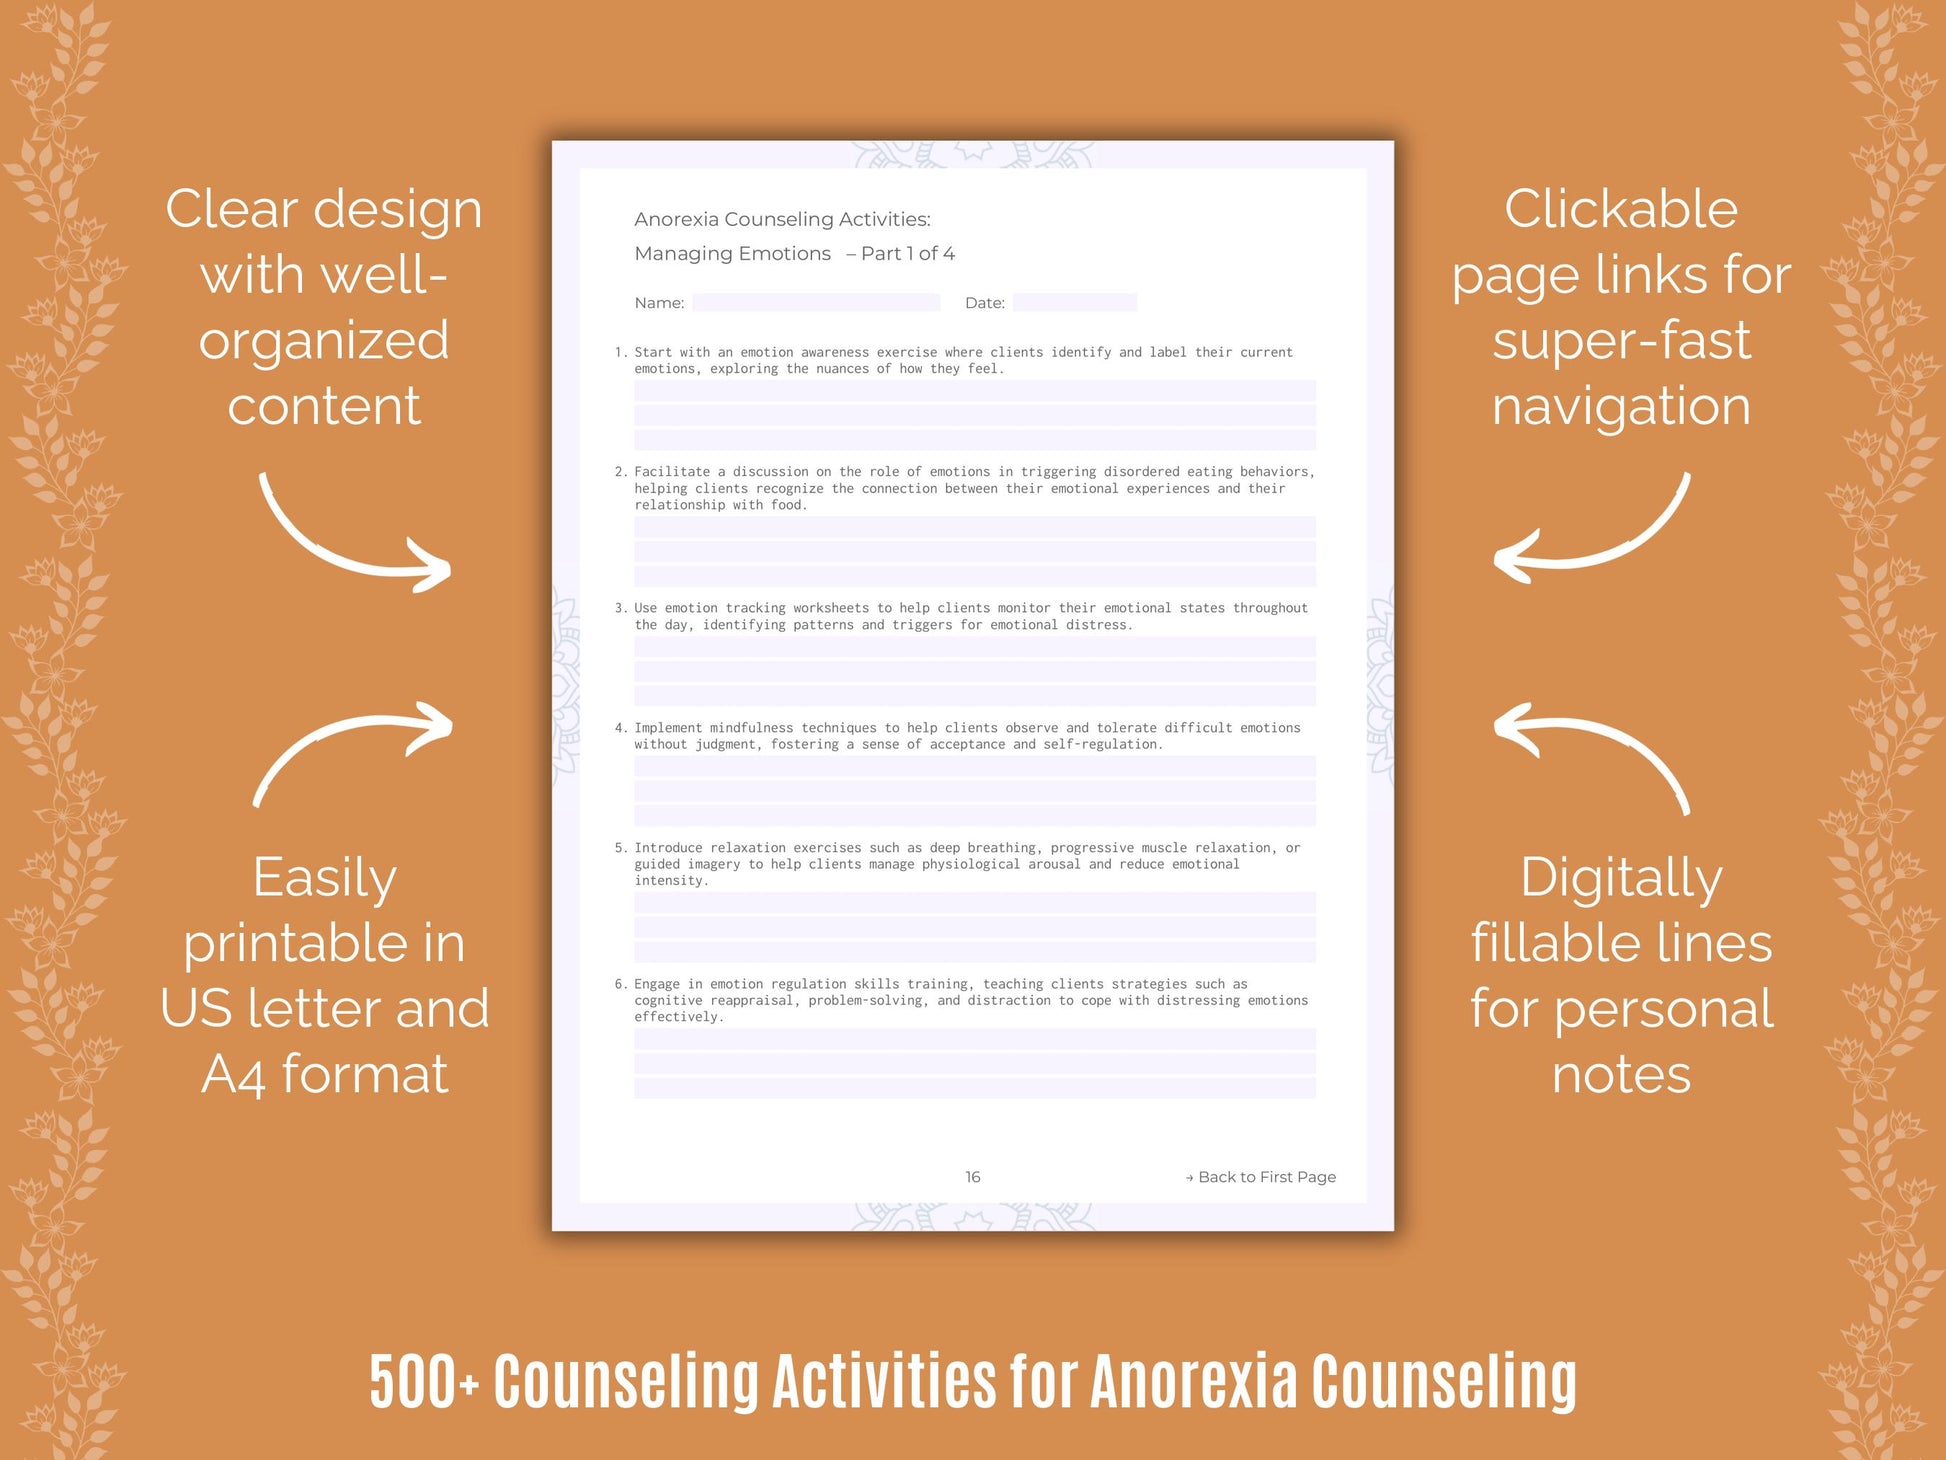 Anorexia Counseling Activities